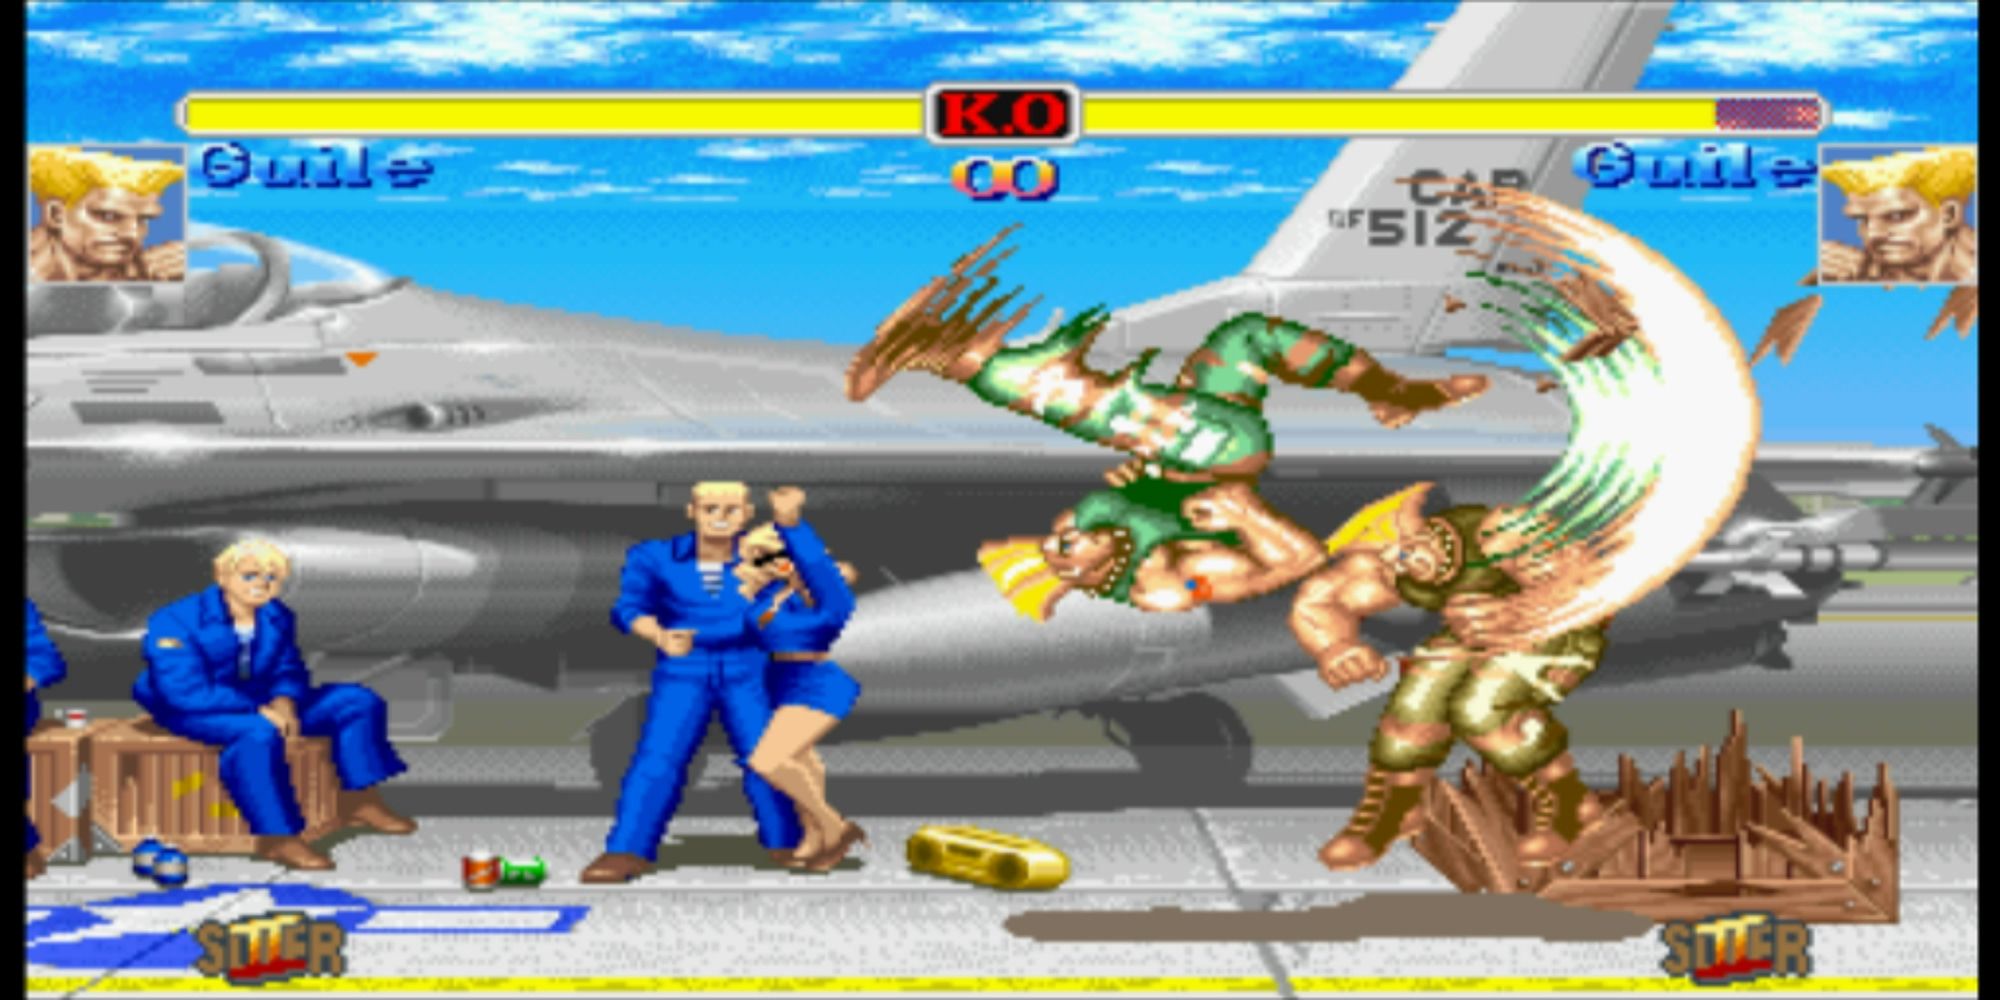 Super SF2 Guile hits Guile with a Flash Kick on a US Air Force Base in Hyper Street Fighter 2.